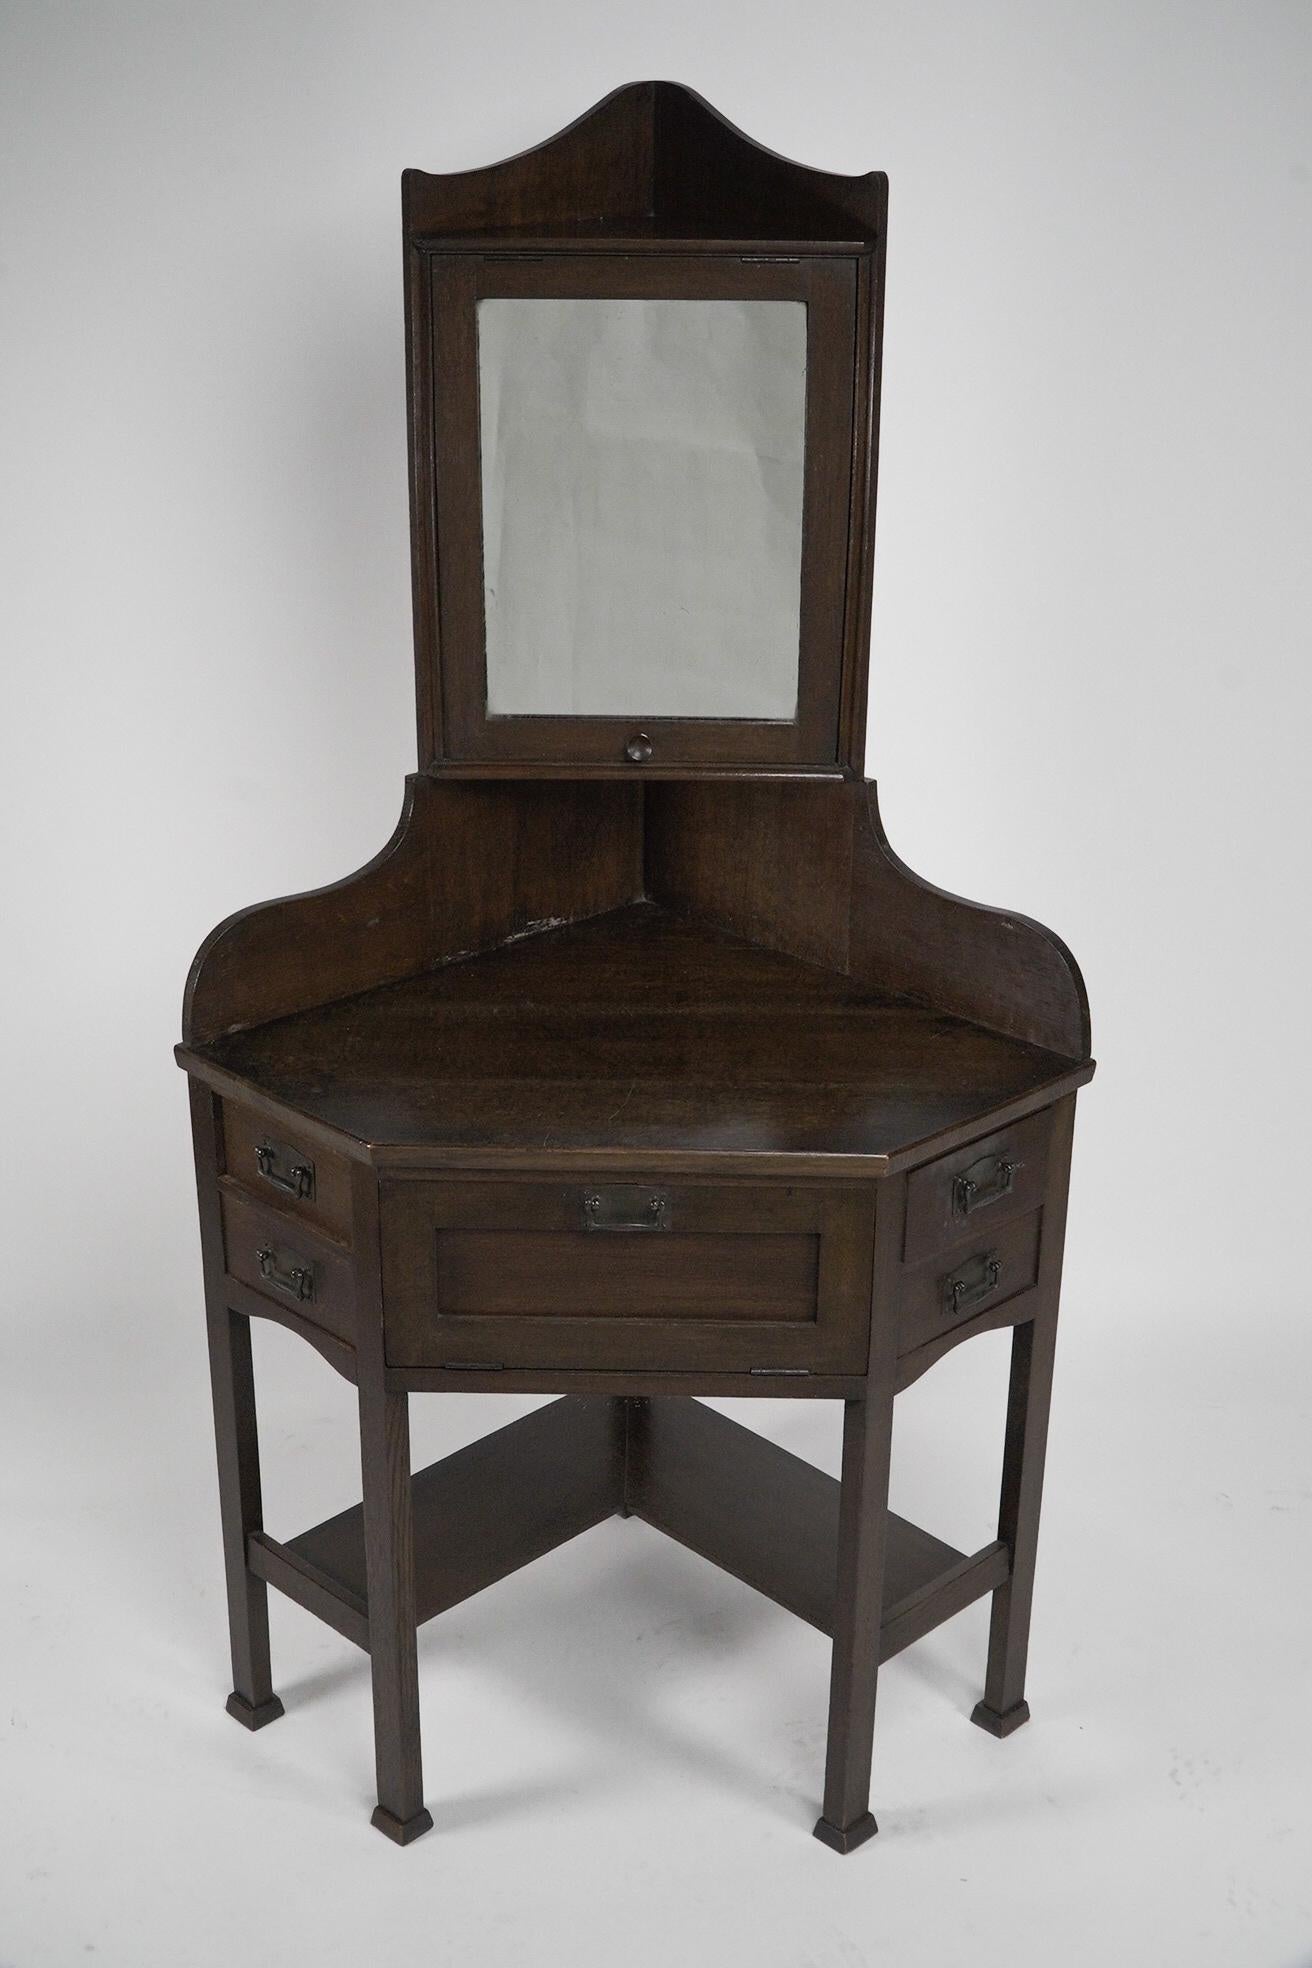 Liberty and Co. A rare and unusual Arts and Crafts oak corner dressing table. The mirror pulls up on a stop-and-stay system to adjust the angle. 
Illustrated in Liberty's Furniture 1875-1915. The Birth of Modern Interior Design. By Daryl Bennet.
